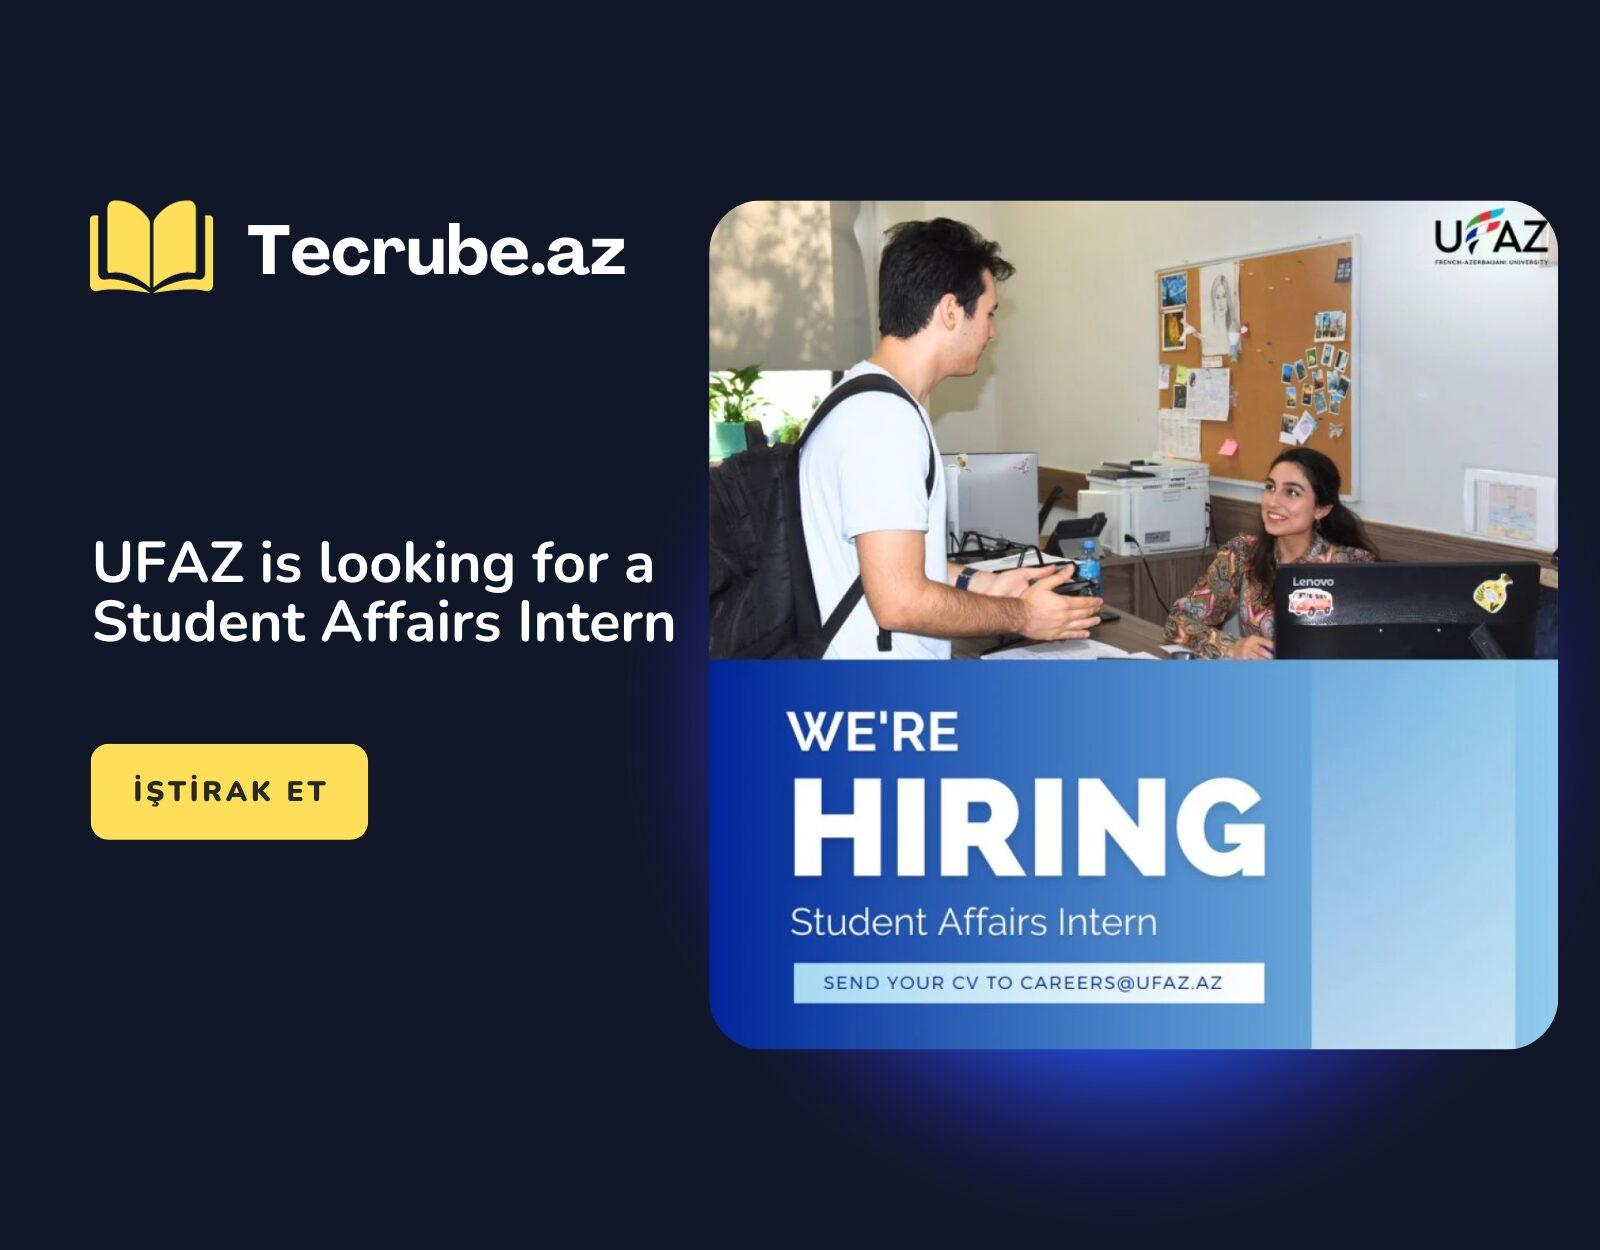 UFAZ is looking for a Student Affairs Intern